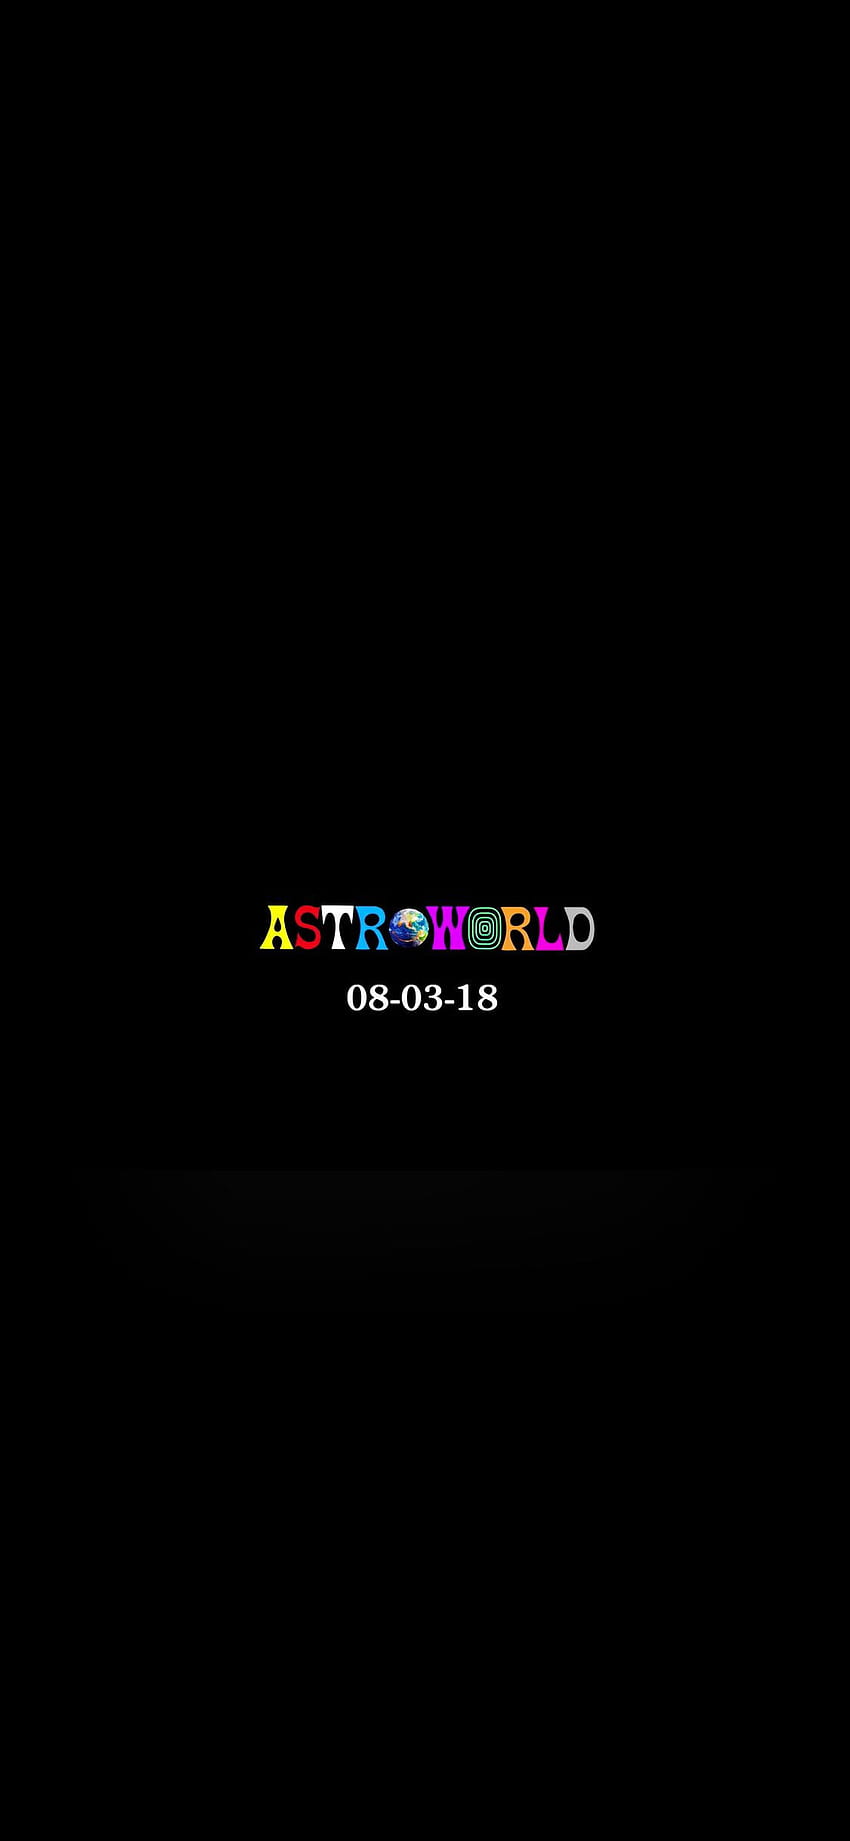 Astroworld from Apple Music trailer iPhone HD phone wallpaper